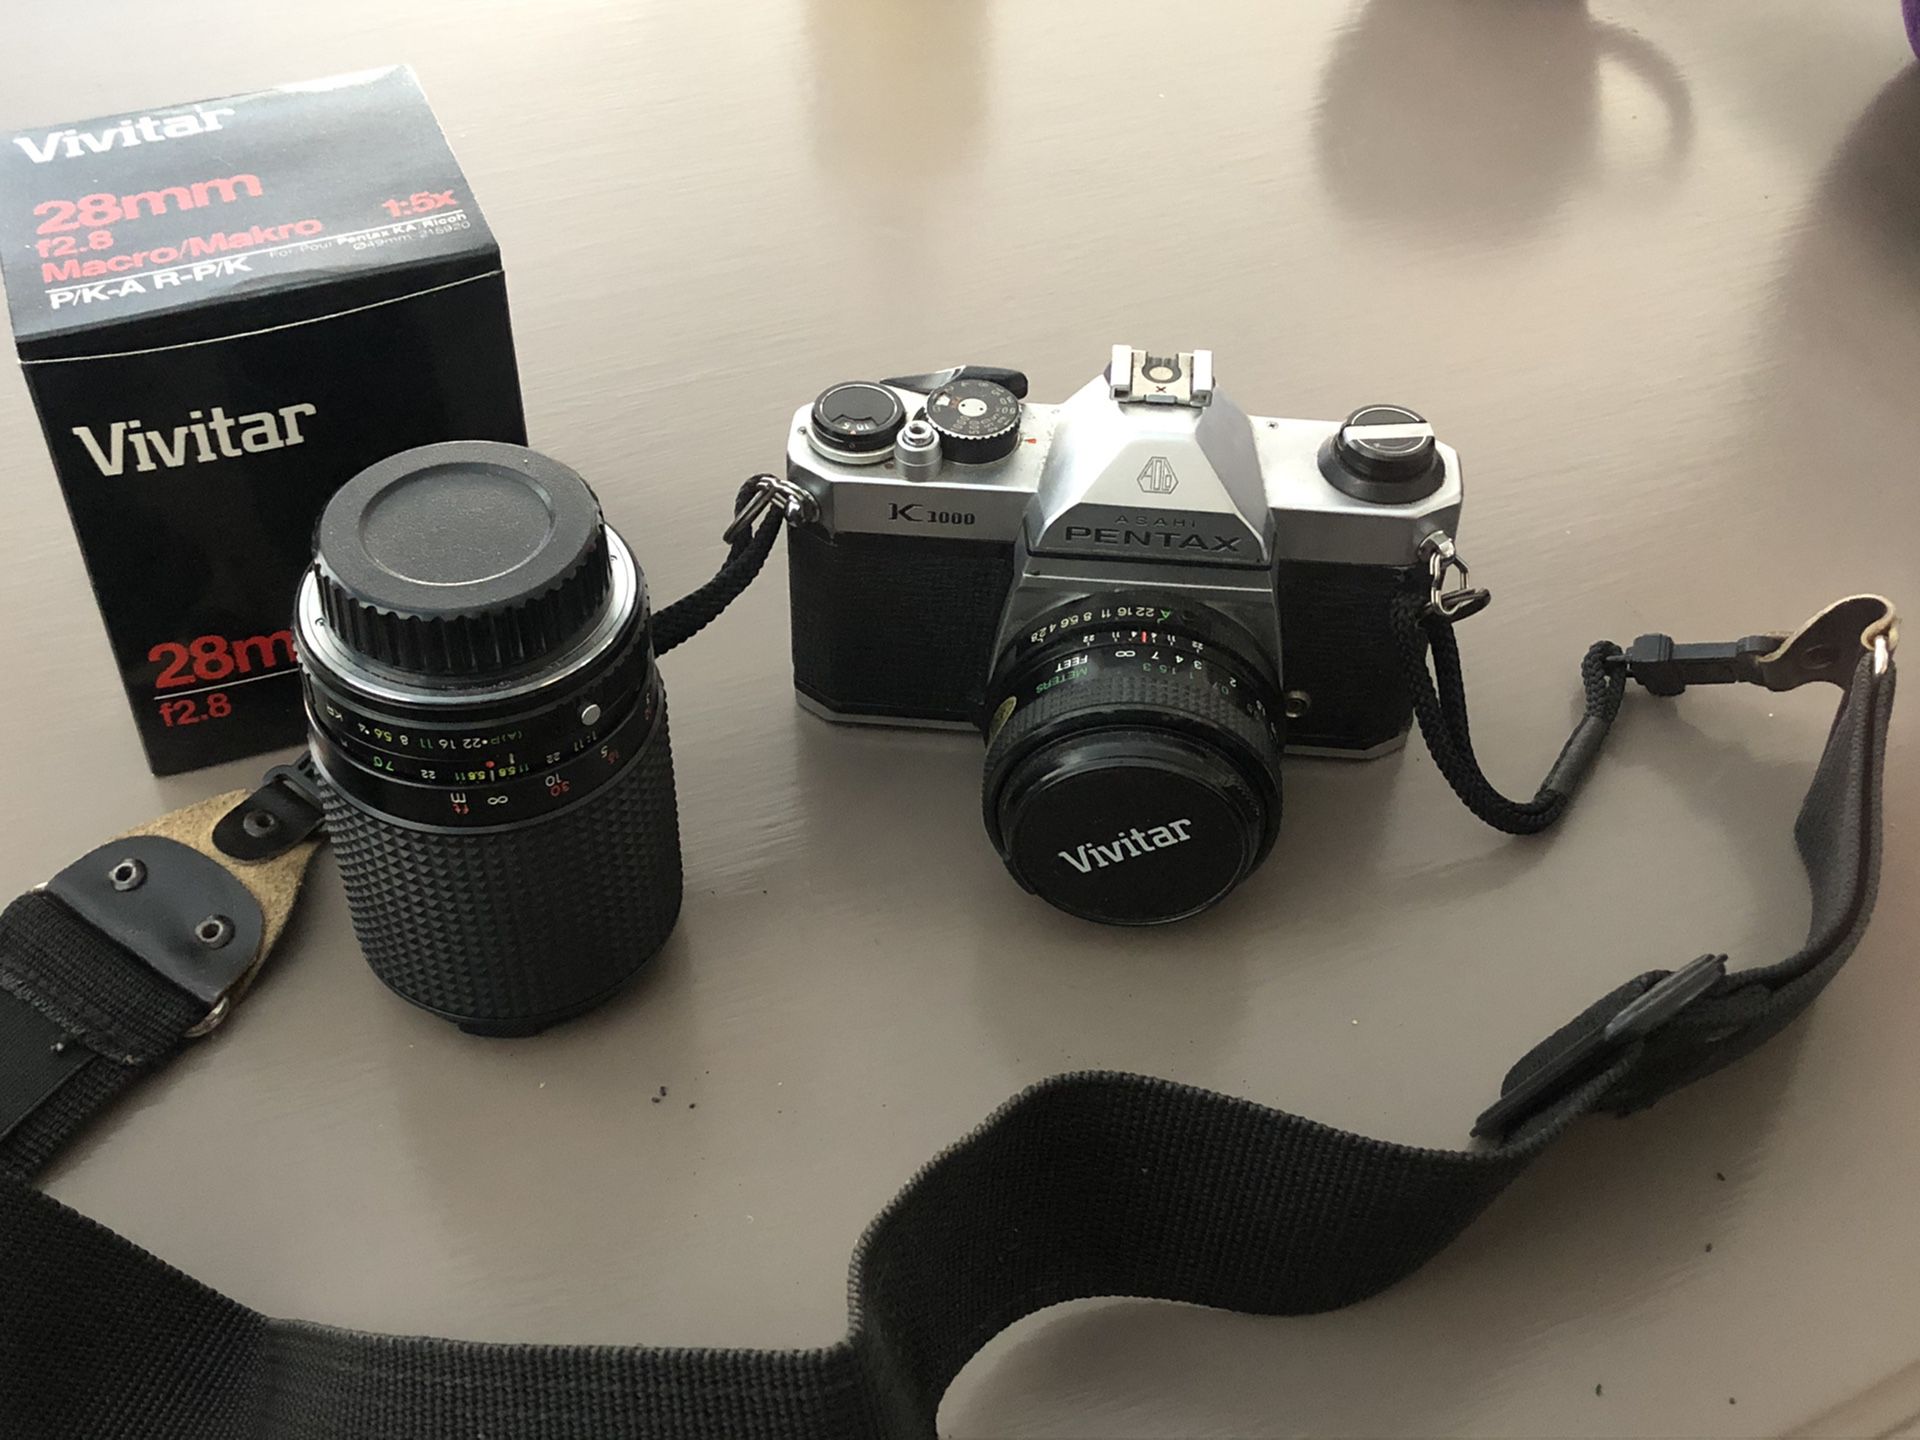 Pentax K1000 camera with 3 lens options